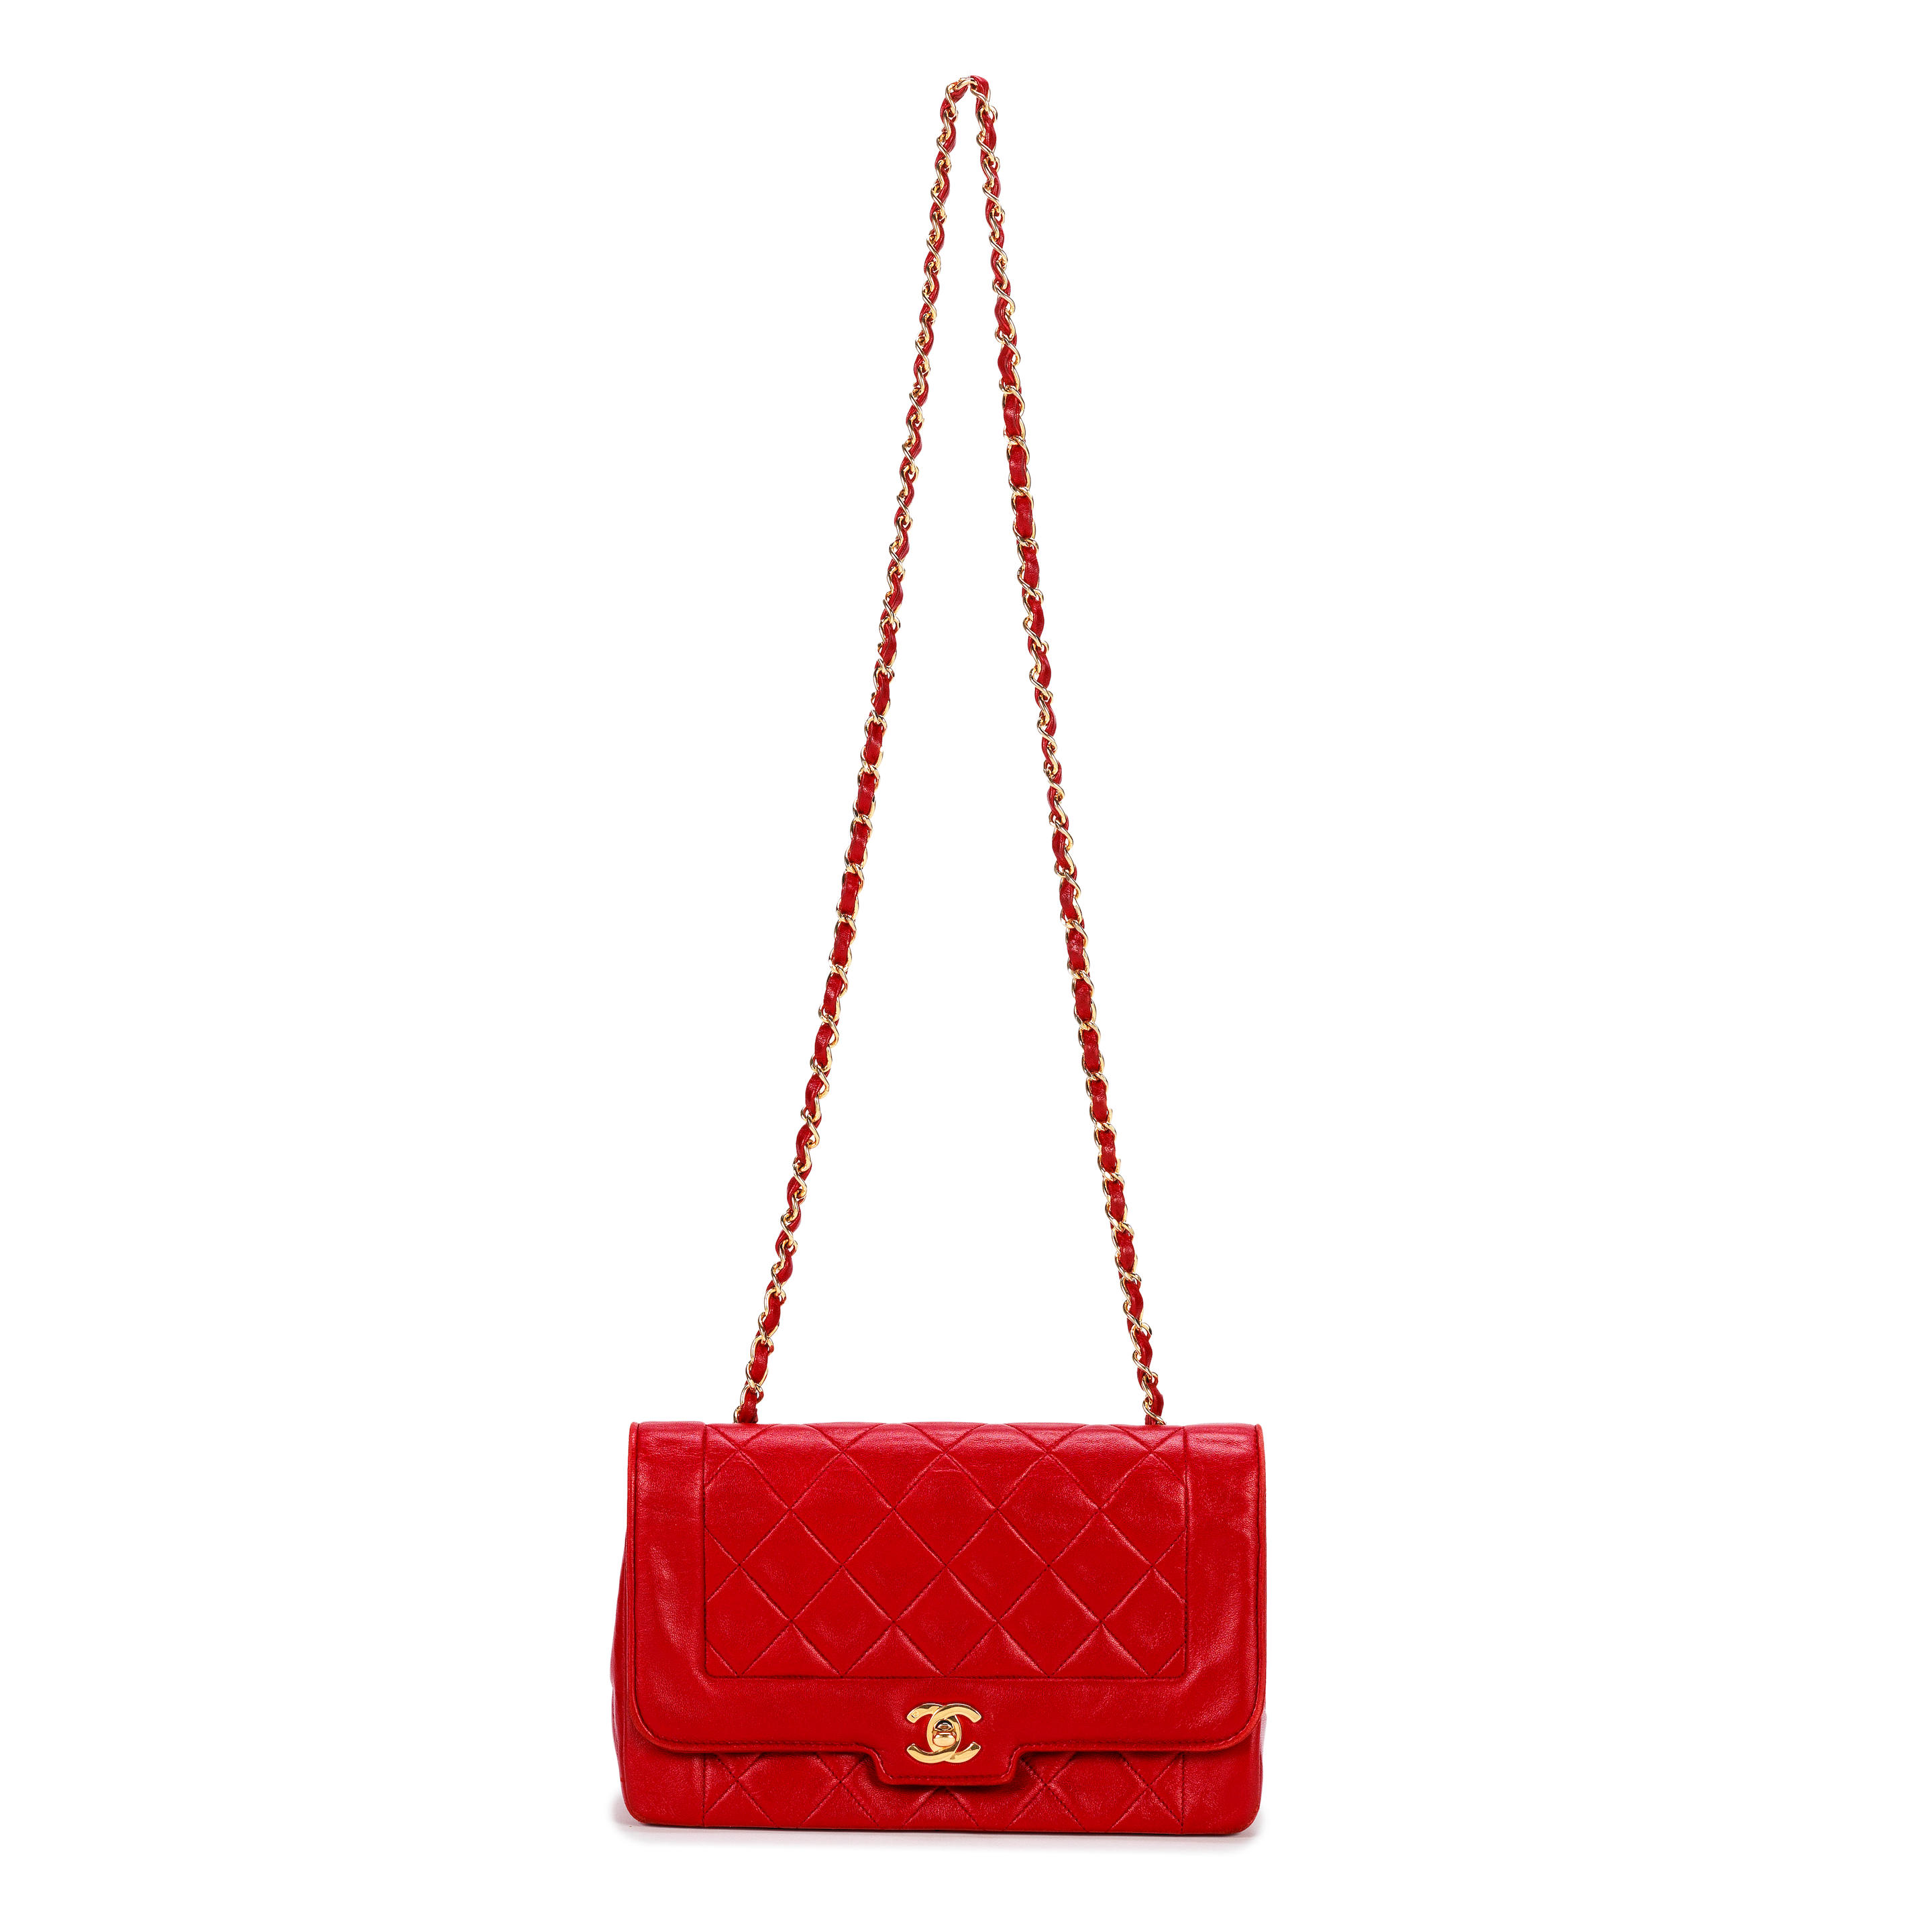 Bonhams : CHANEL A RED LAMBSKIN DIANA SQUARE FLAP BAG 1989-1991 (includes  serial sticker and dust bag)